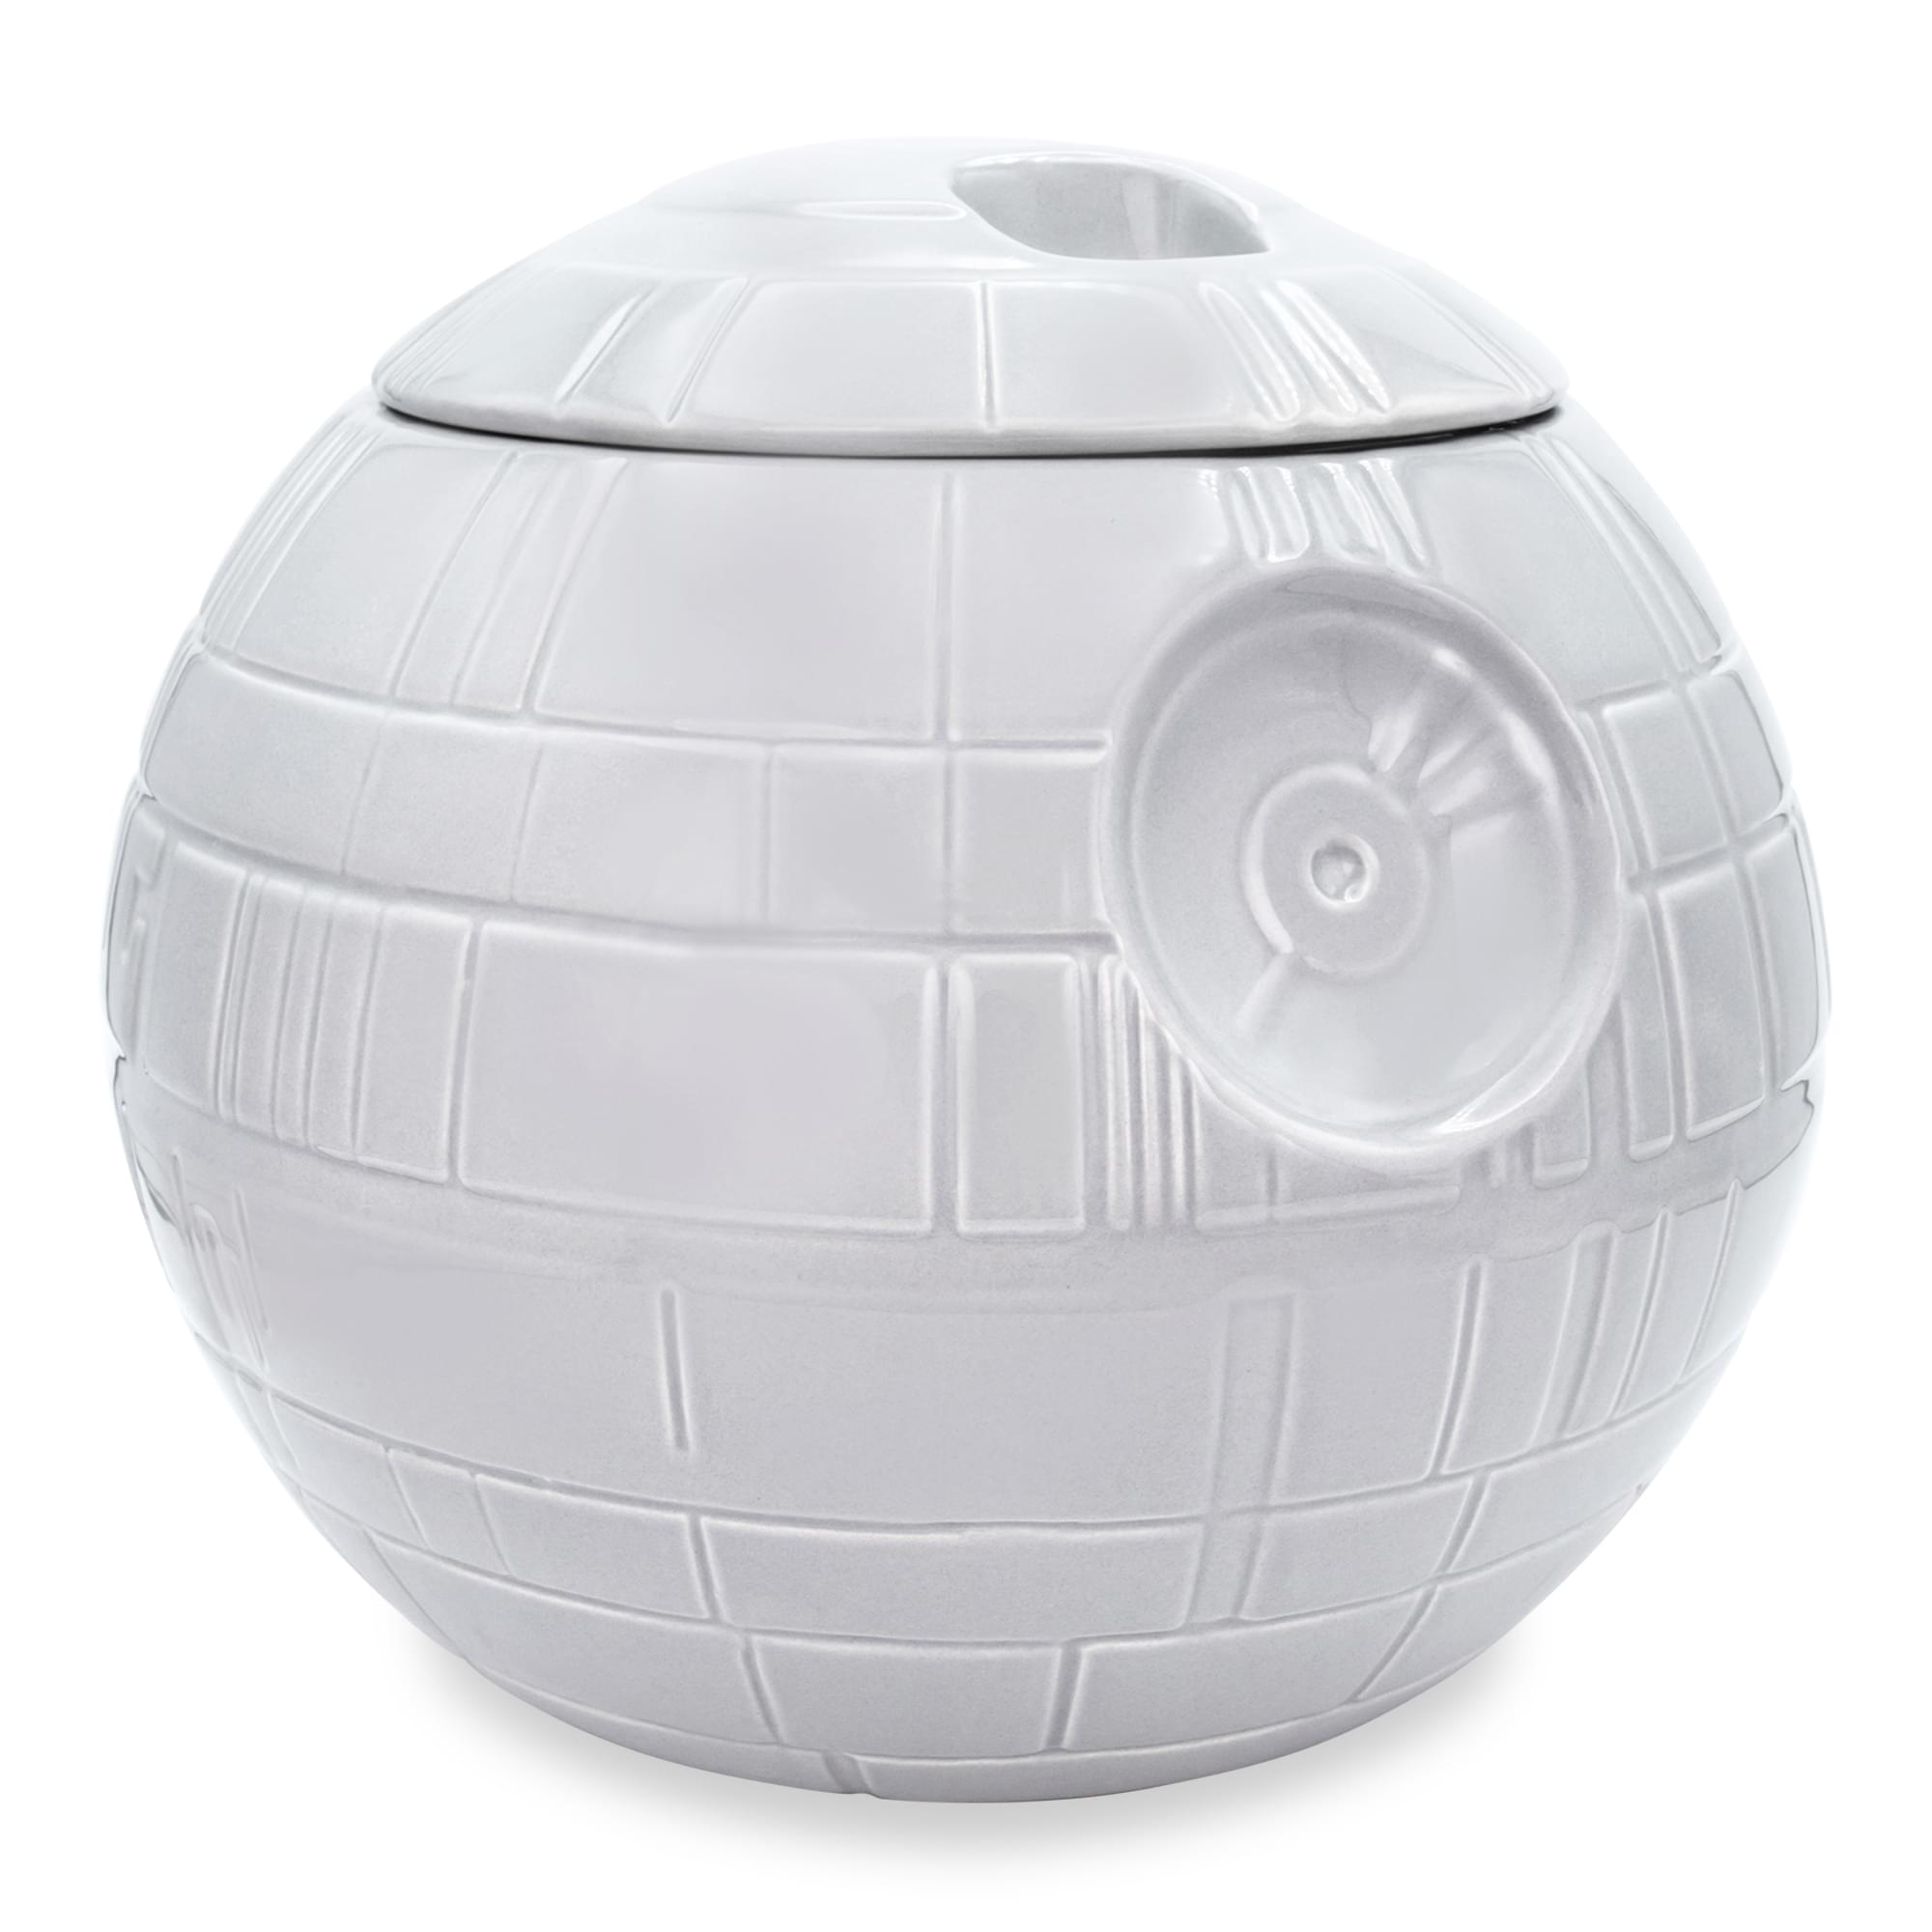 Star Wars Death Star Ceramic Cookie Jar Container , 10 Inches Tall